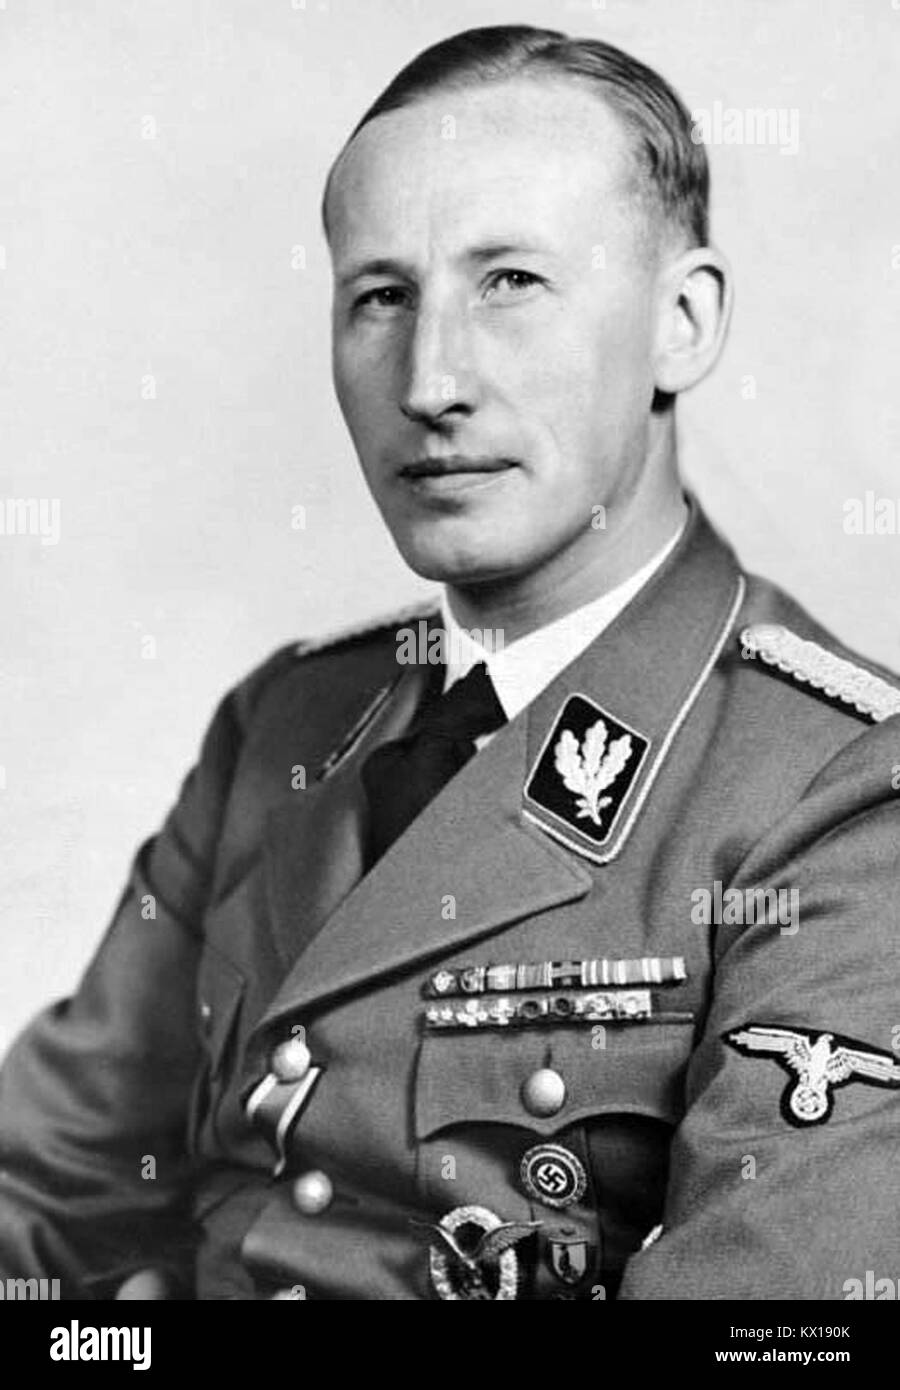 Reinhard Tristan Eugen Heydrich was a high-ranking German Nazi official during World War II, and a main architect of the Holocaust. He was an SS-Obergruppenführer und General der Polizei (Senior Group Leader and General of Police) as well as chief of the Reich Main Security Office (including the Gestapo, Kripo, and SD). Stock Photo